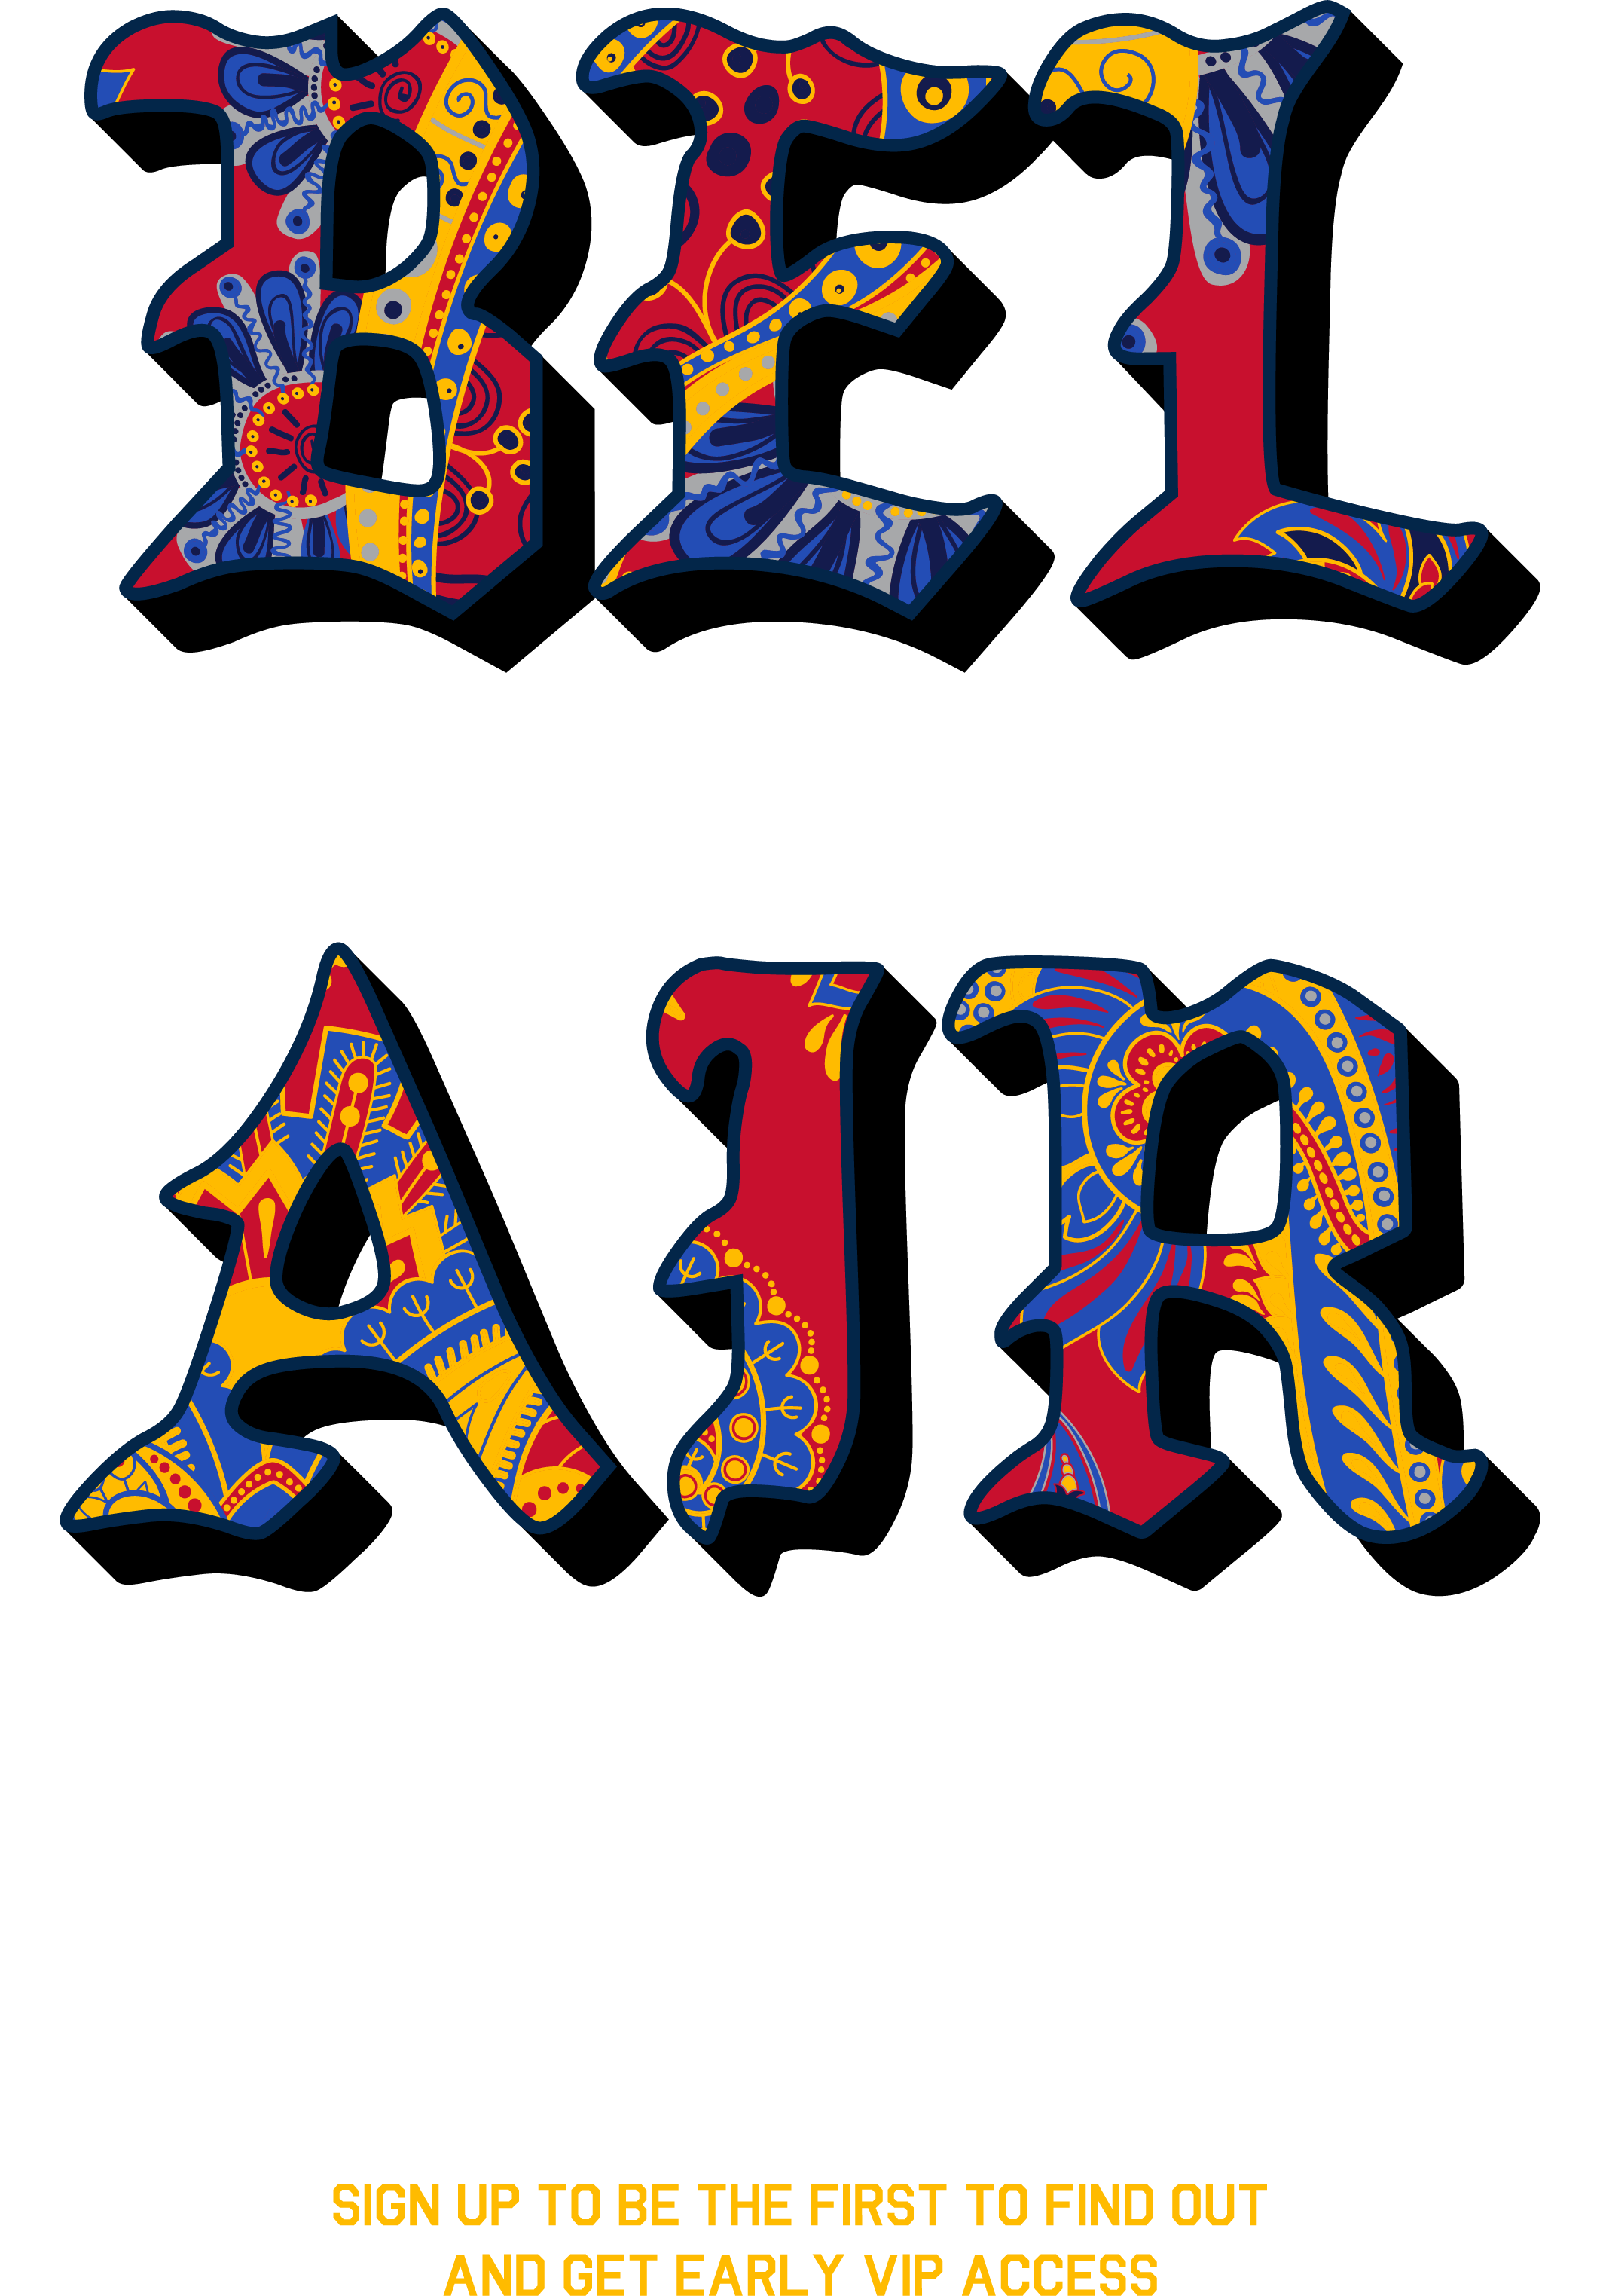 The New Season begins 2-23-23, Thursday, 1PM EST. Sign up to be the first to find out and get early access!